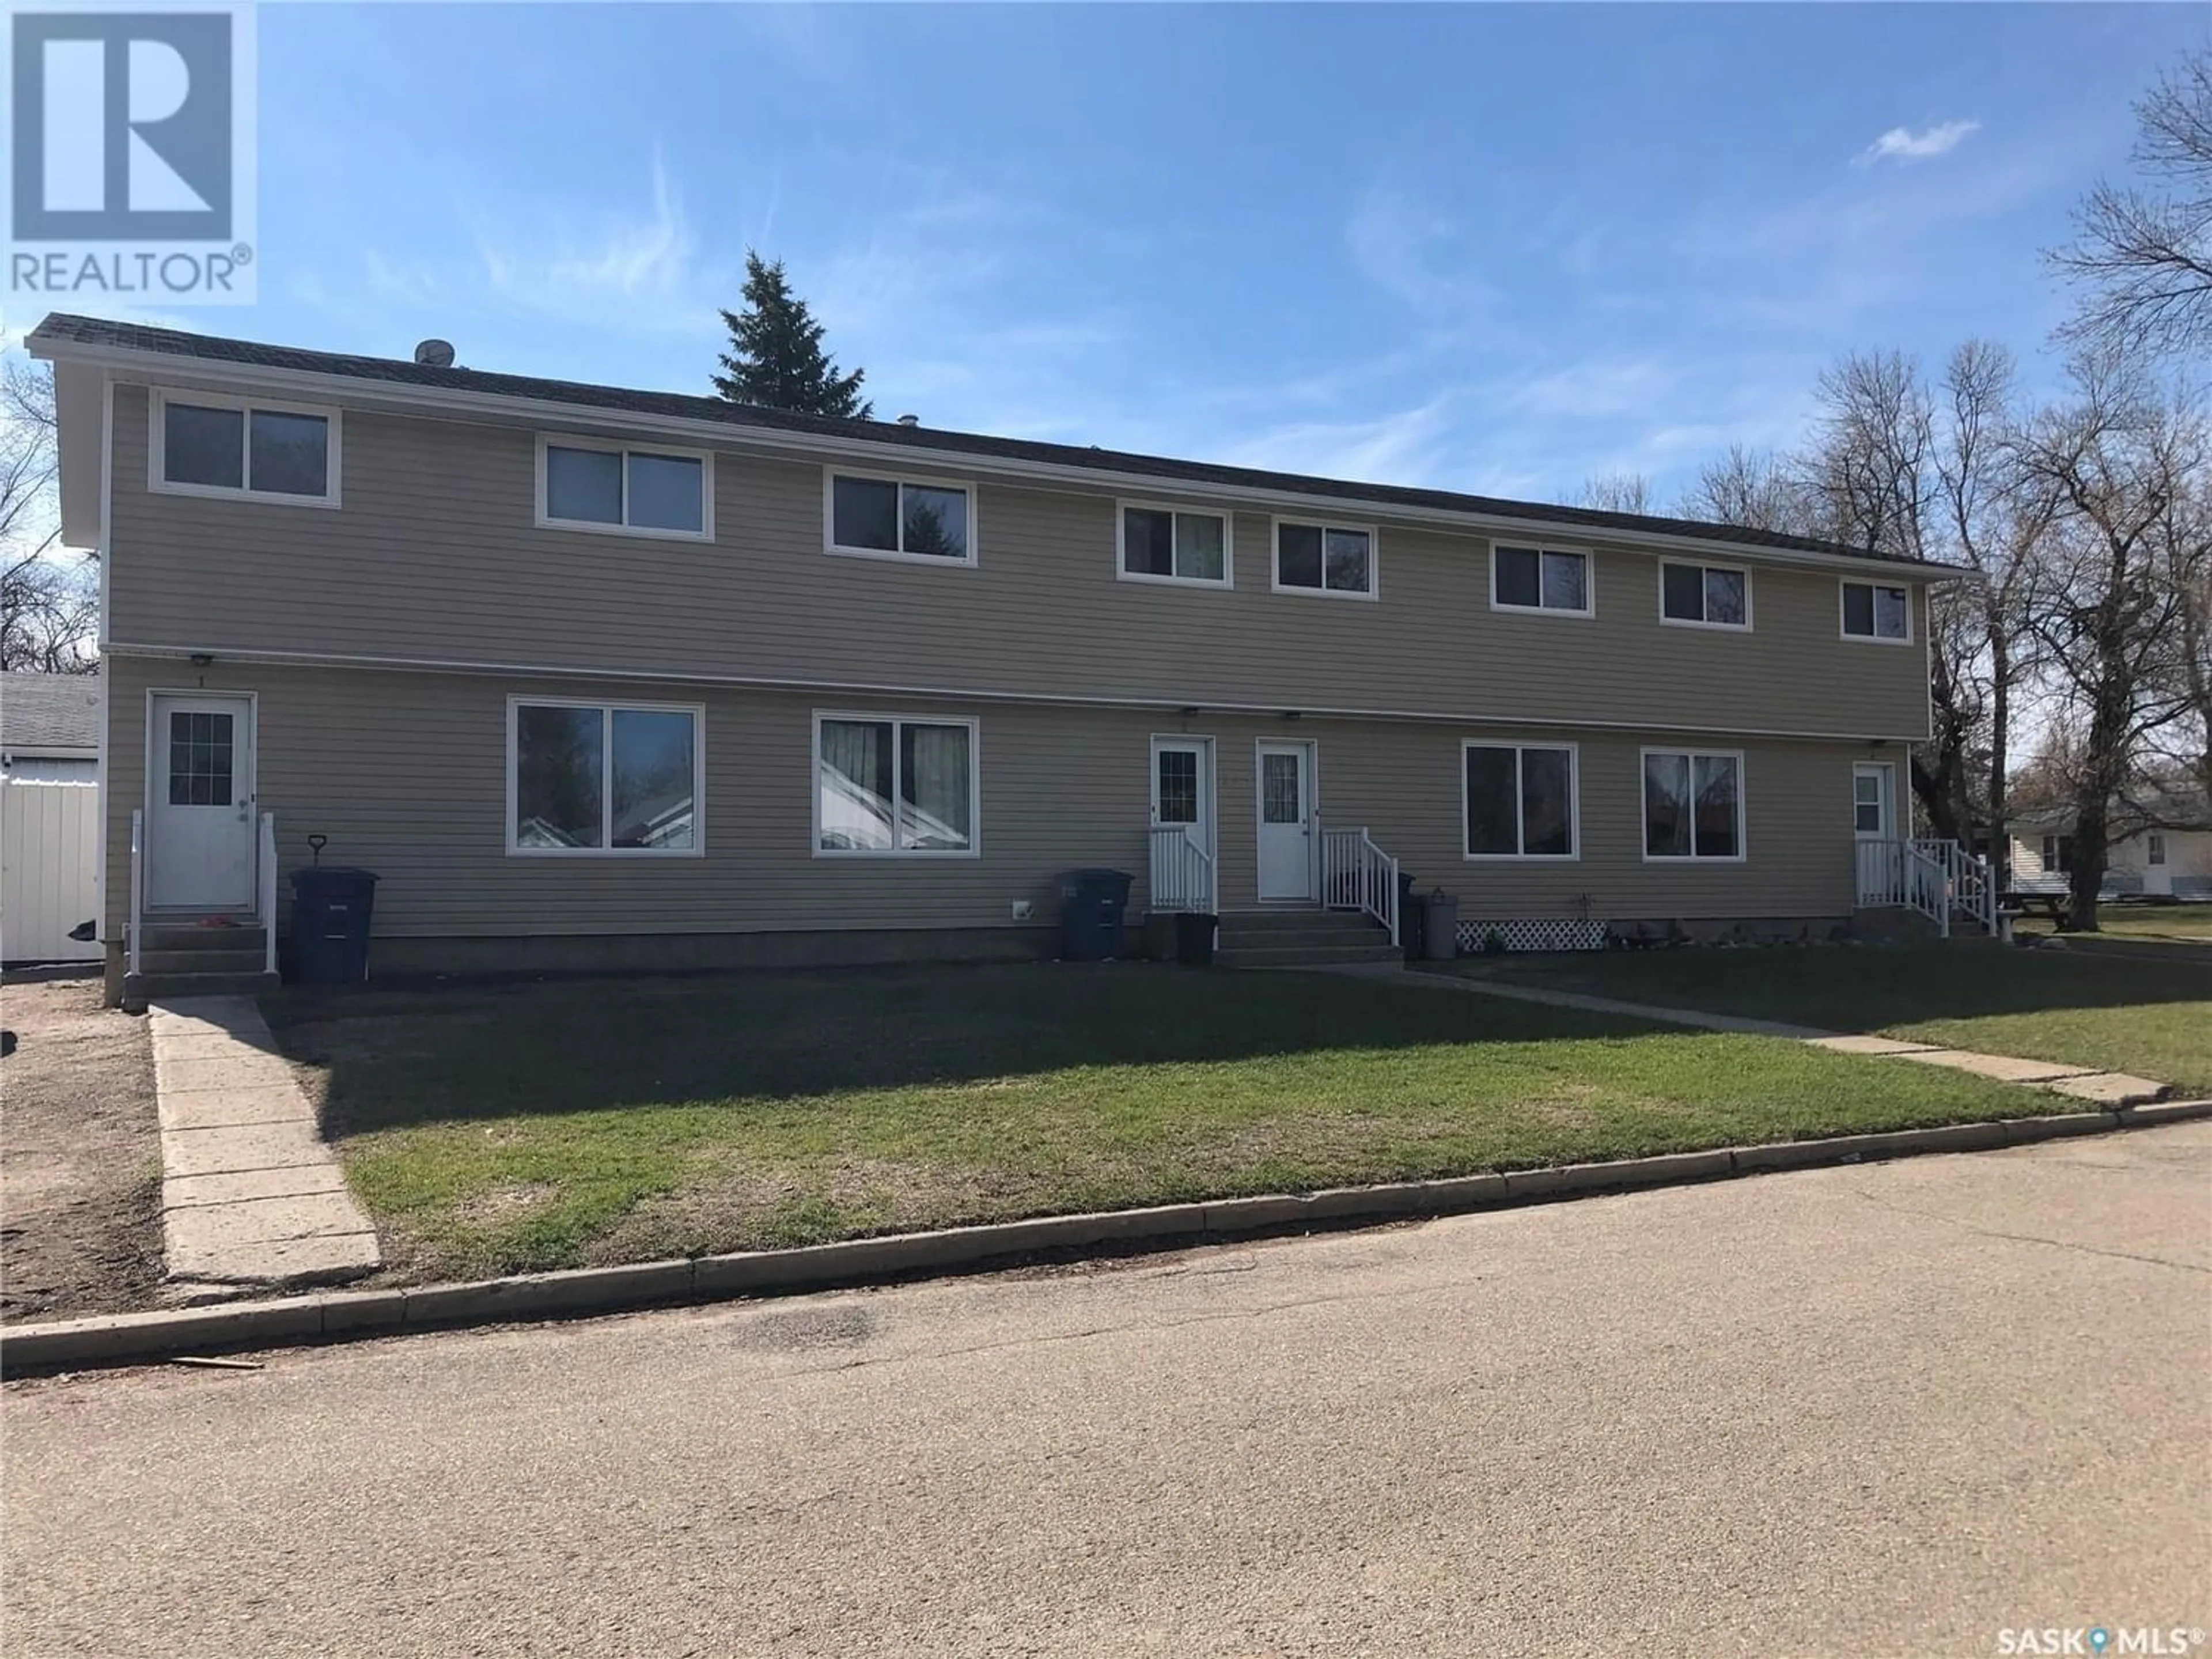 A pic from exterior of the house or condo for 1202 Windover AVENUE, Moosomin Saskatchewan S0G3N0